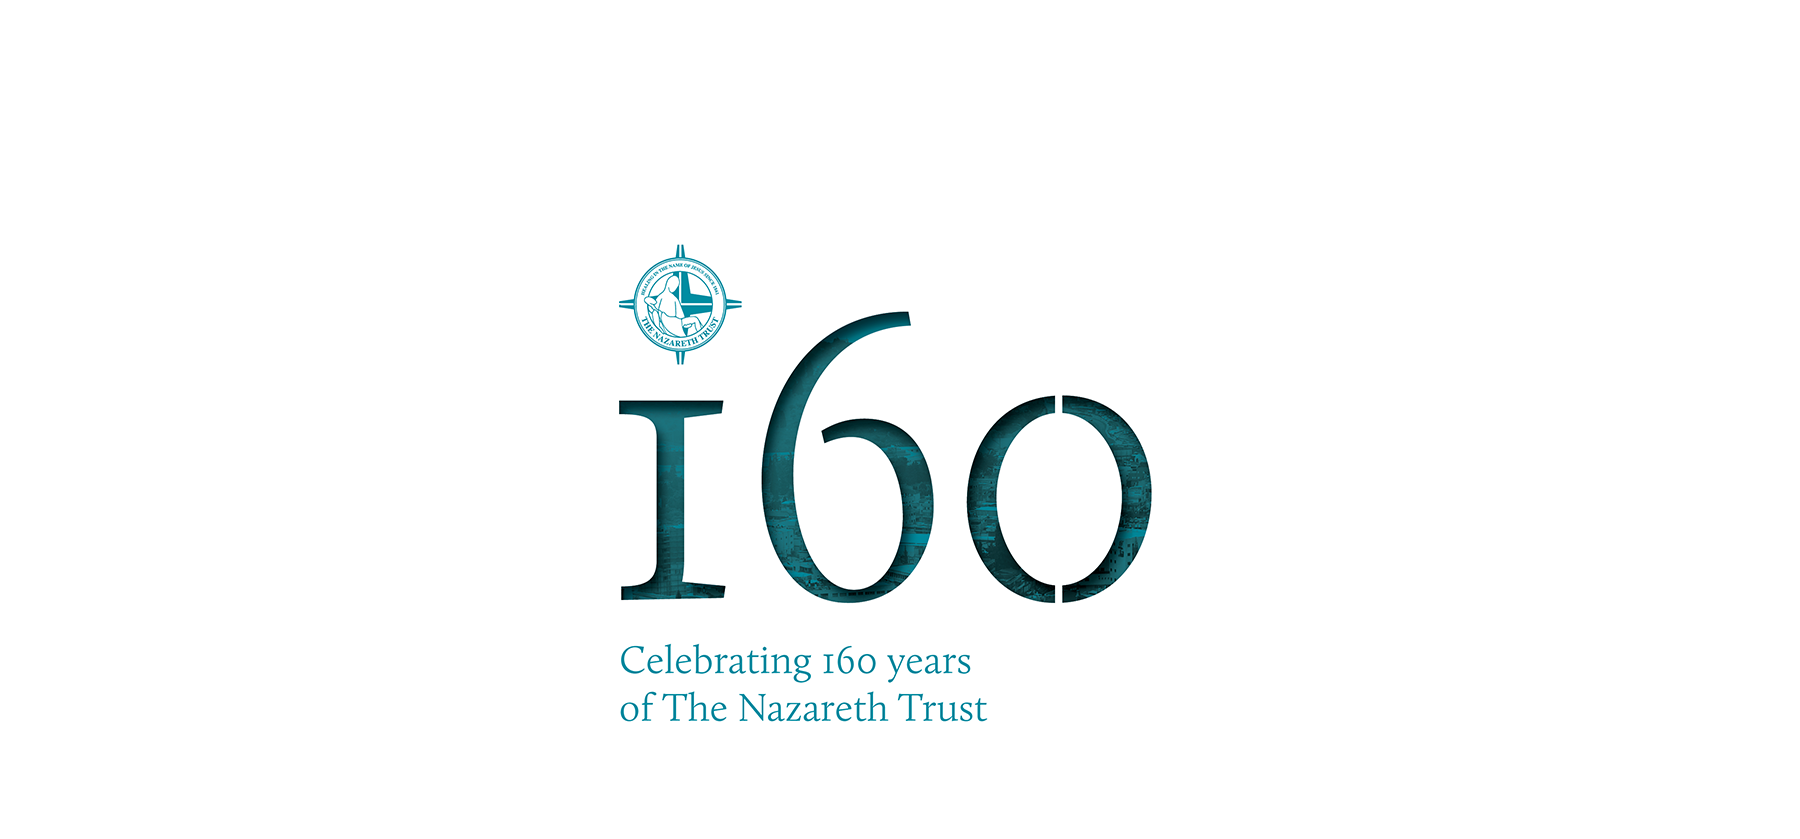 The Nazareth Trust launches its 160th Anniversary Brochure